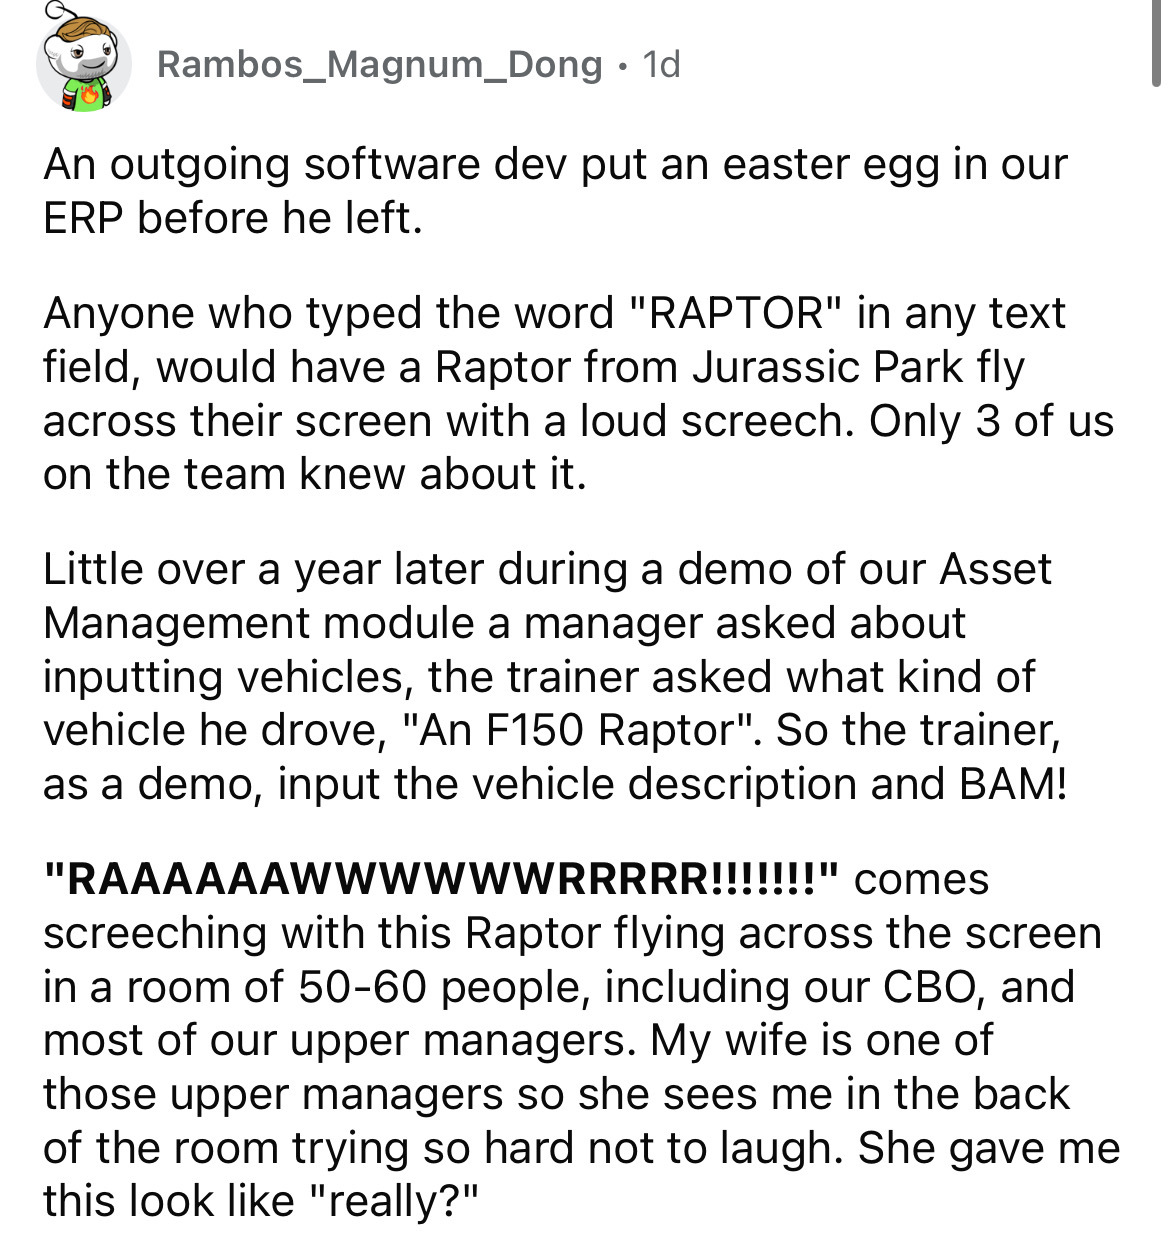 document - Rambos_Magnum_Dong 1d . An outgoing software dev put an easter egg in our Erp before he left. Anyone who typed the word "Raptor" in any text field, would have a Raptor from Jurassic Park fly across their screen with a loud screech. Only 3 of us